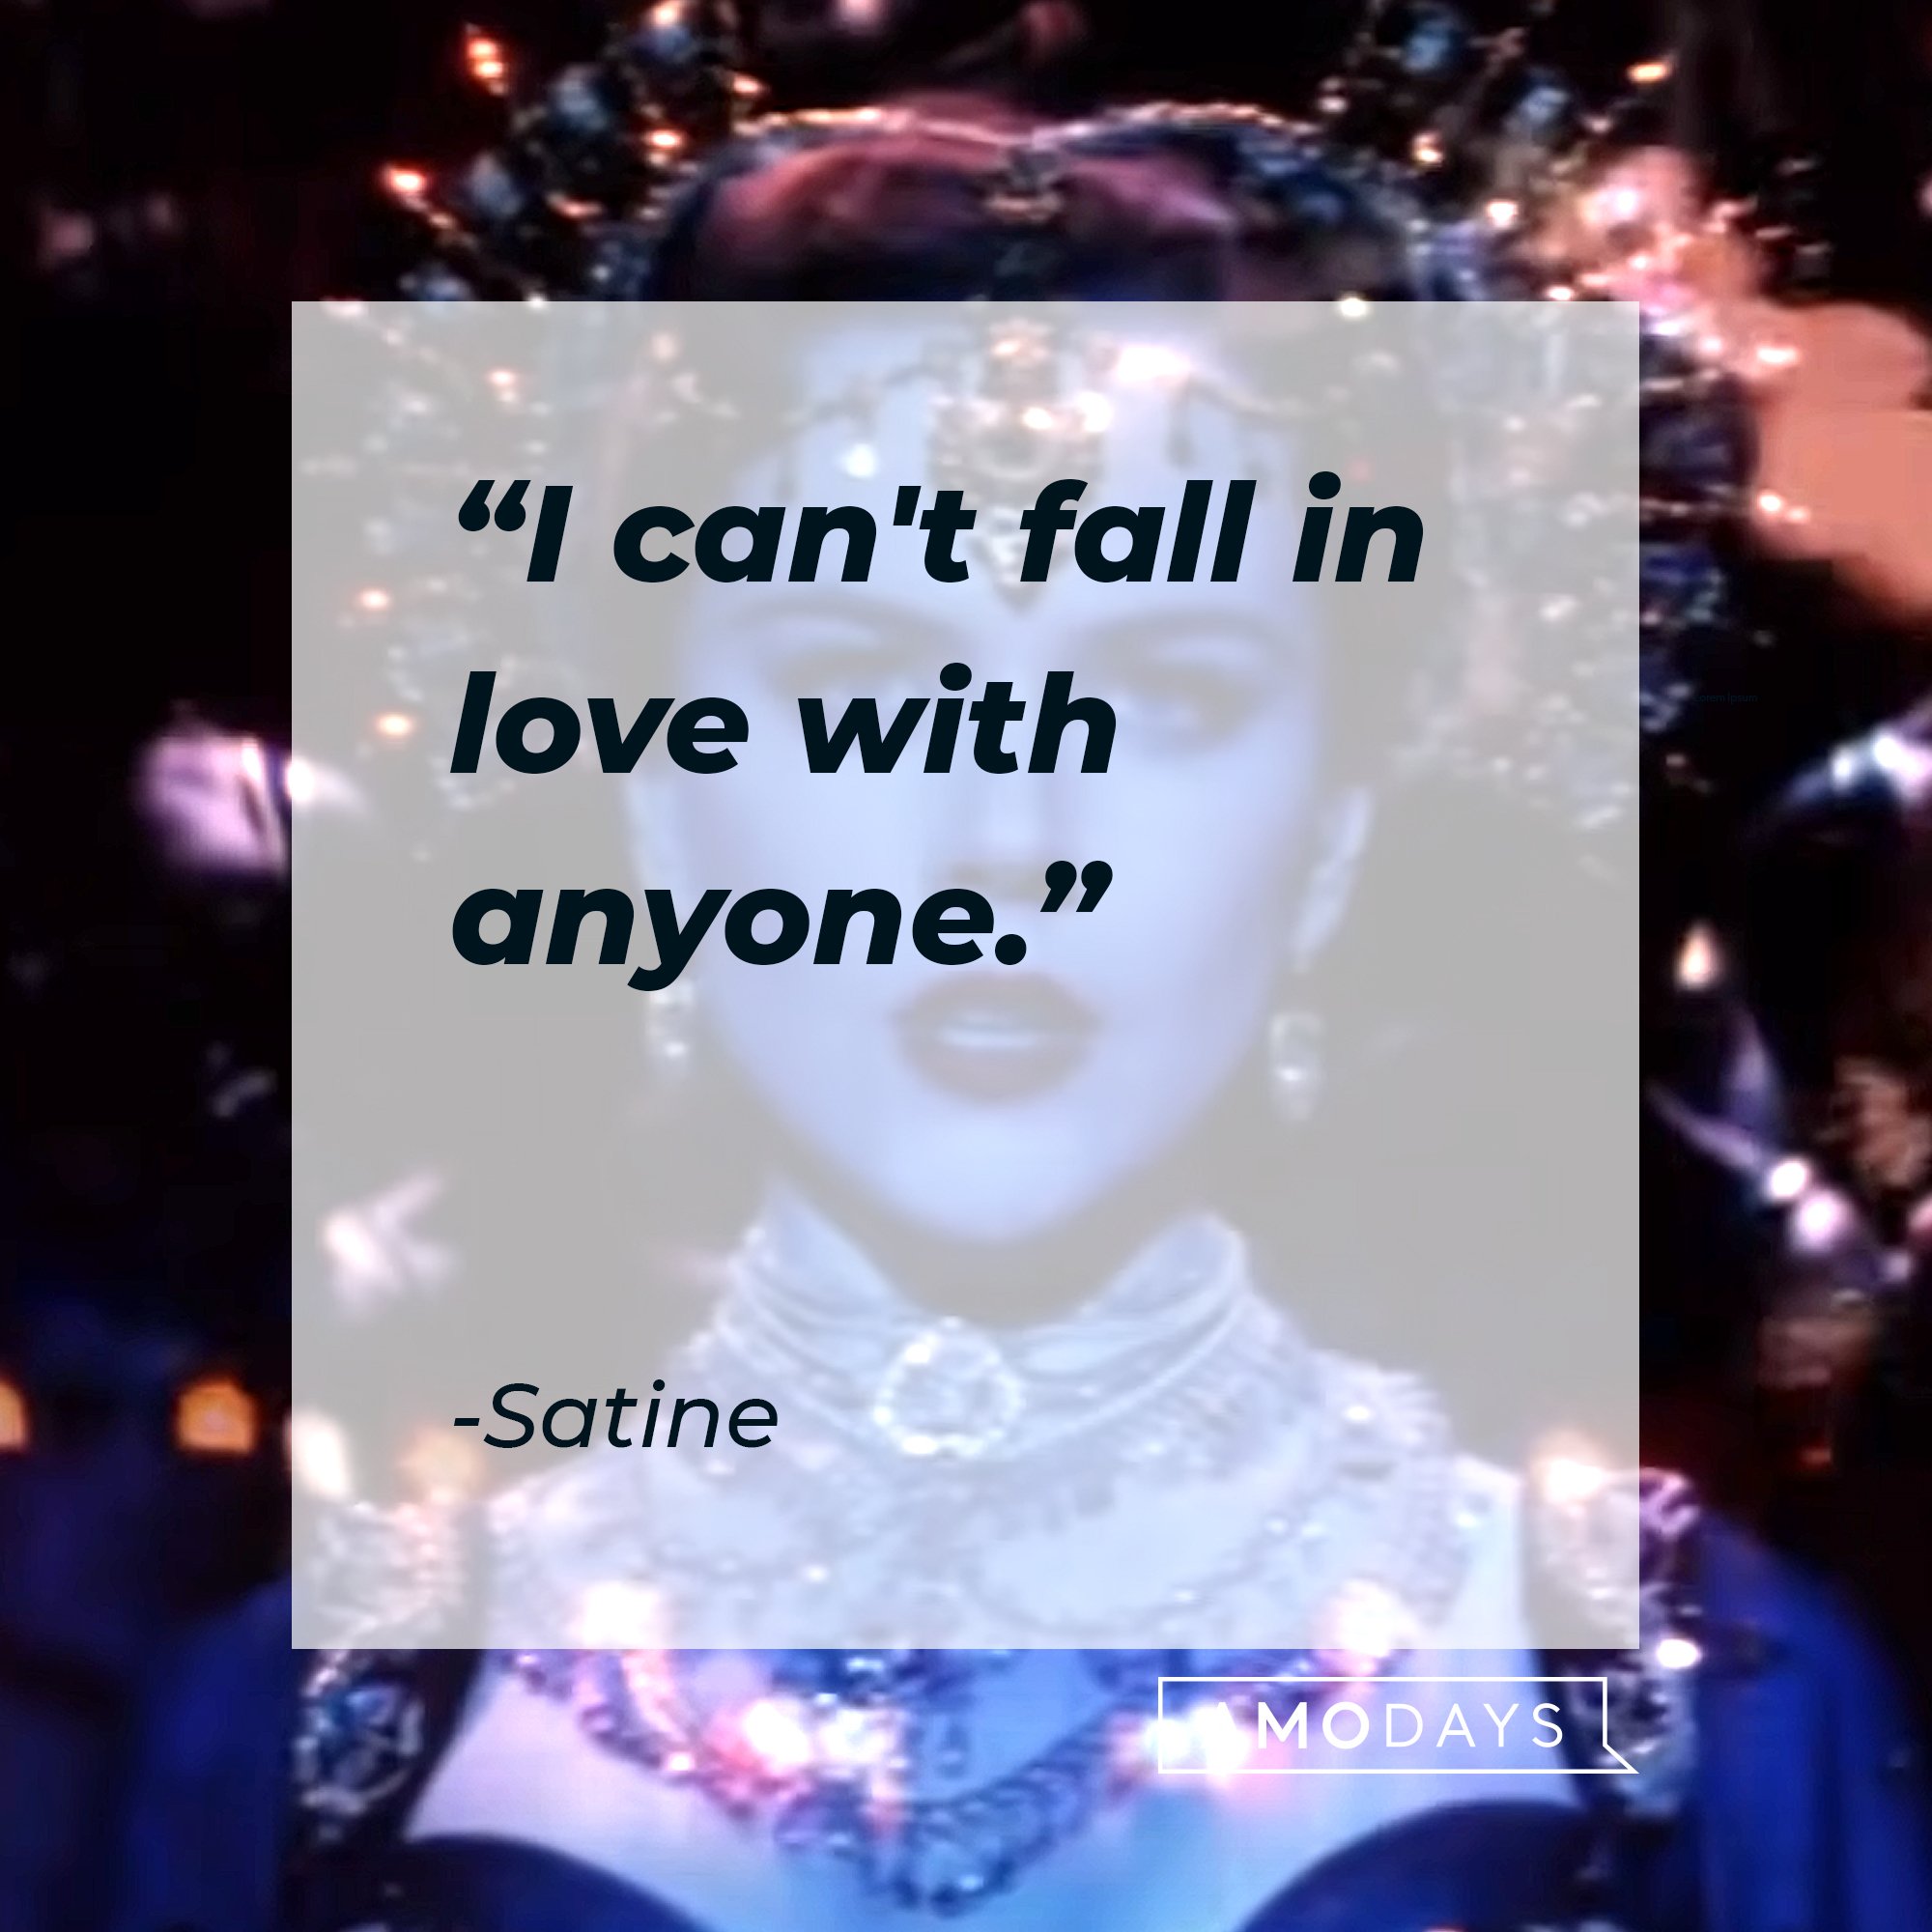 Satine's quote: "I can't fall in love with anyone." | Image: AmoDays